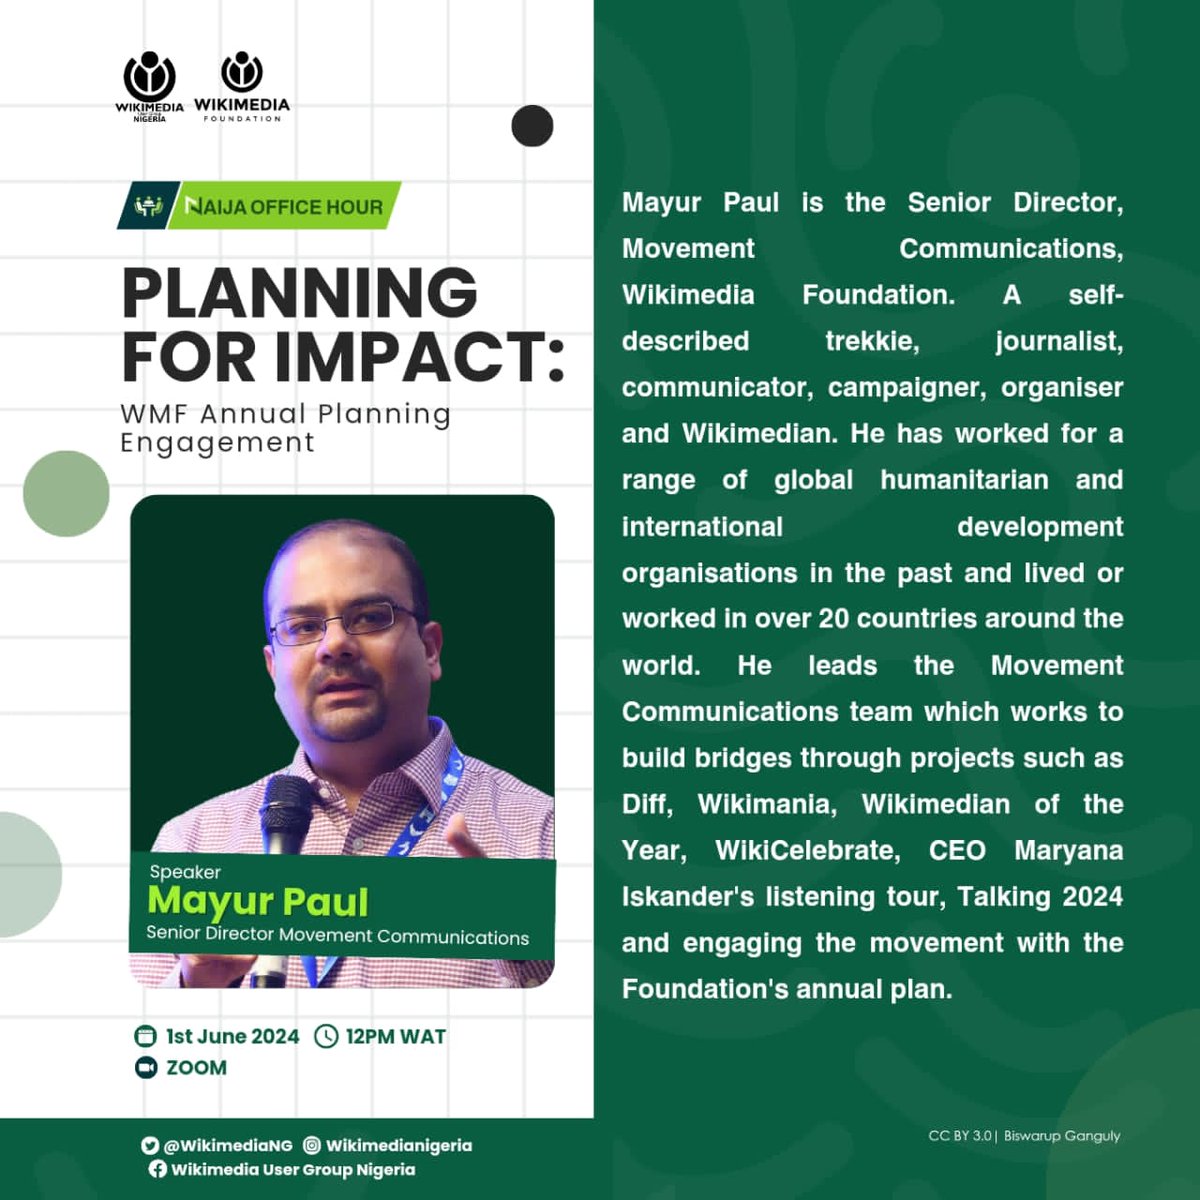 Meet our speaker Mayur Paul!  Join Mayur Paul tomorrow, who will be speaking on the theme: 'PLANNING FOR IMPACT'.  In this session, we will be having an enlightening discussion on the Wikimedia Foundation Annual Plan. Be a part of the session!  Register to be a part of the